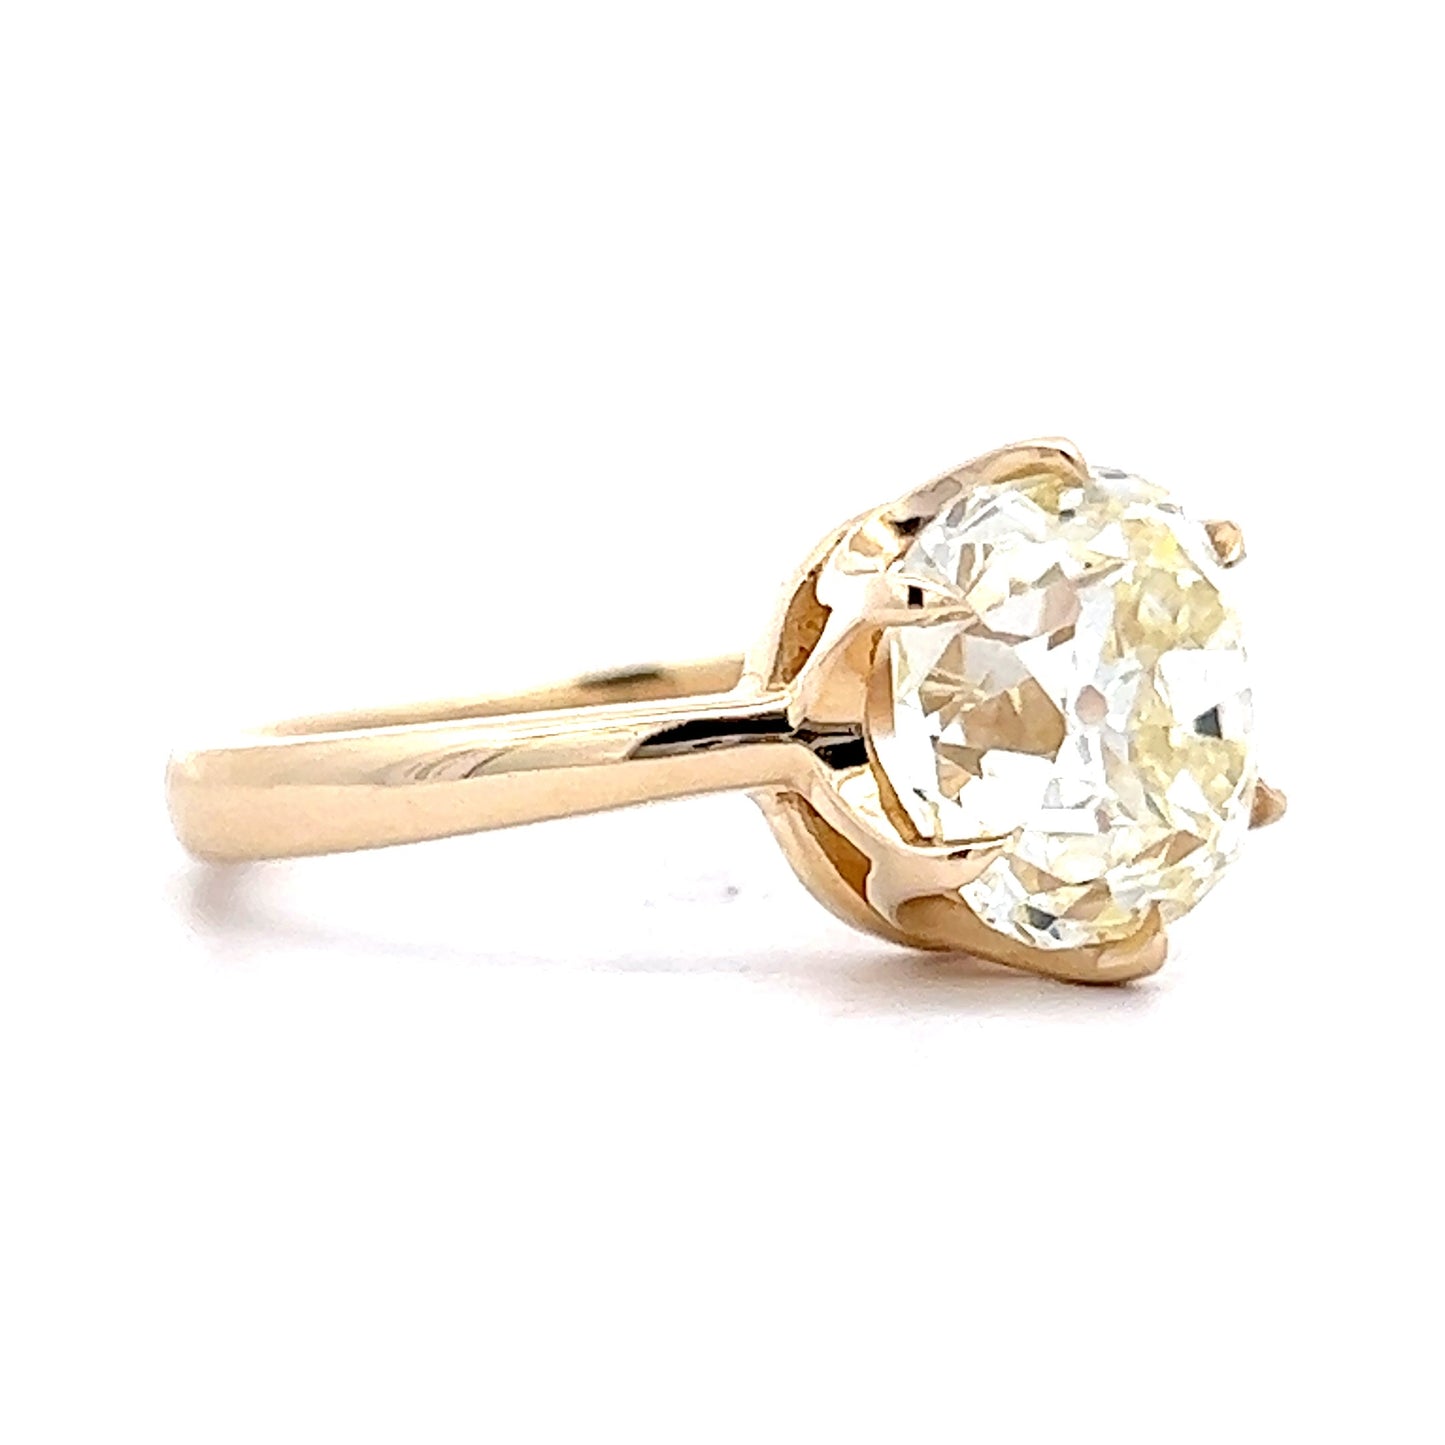 4.56 Old Mine Cushion Diamond Engagement Ring in Yellow Gold